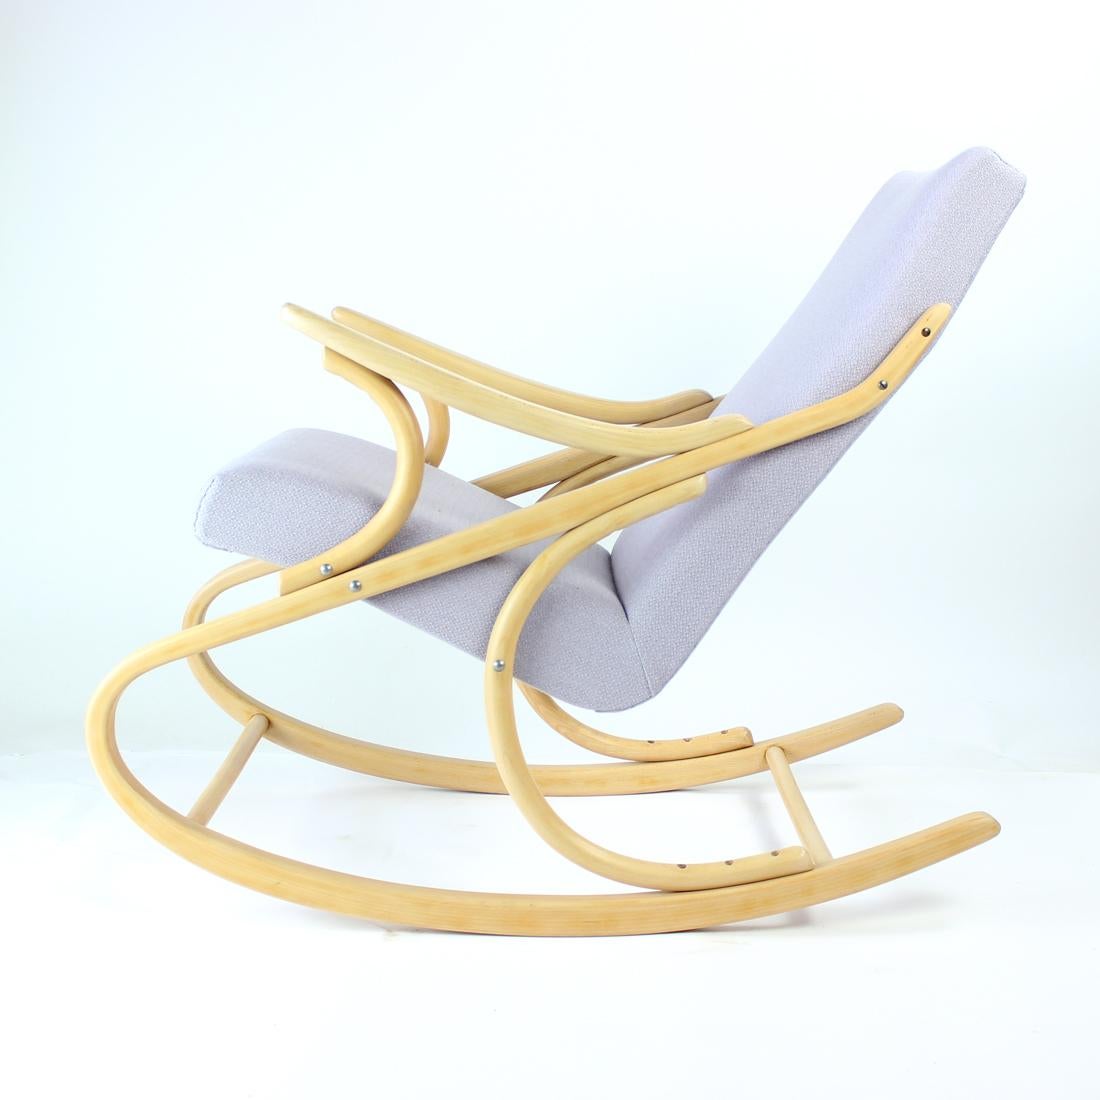 Beautiful, iconic armchair designed by Thonet, produced in 1960s by TON company in Czechoslovakia. The armchair has been completely restored and looks amazing. The construction made of iconic bentwood has been refinished in the natural blond shade